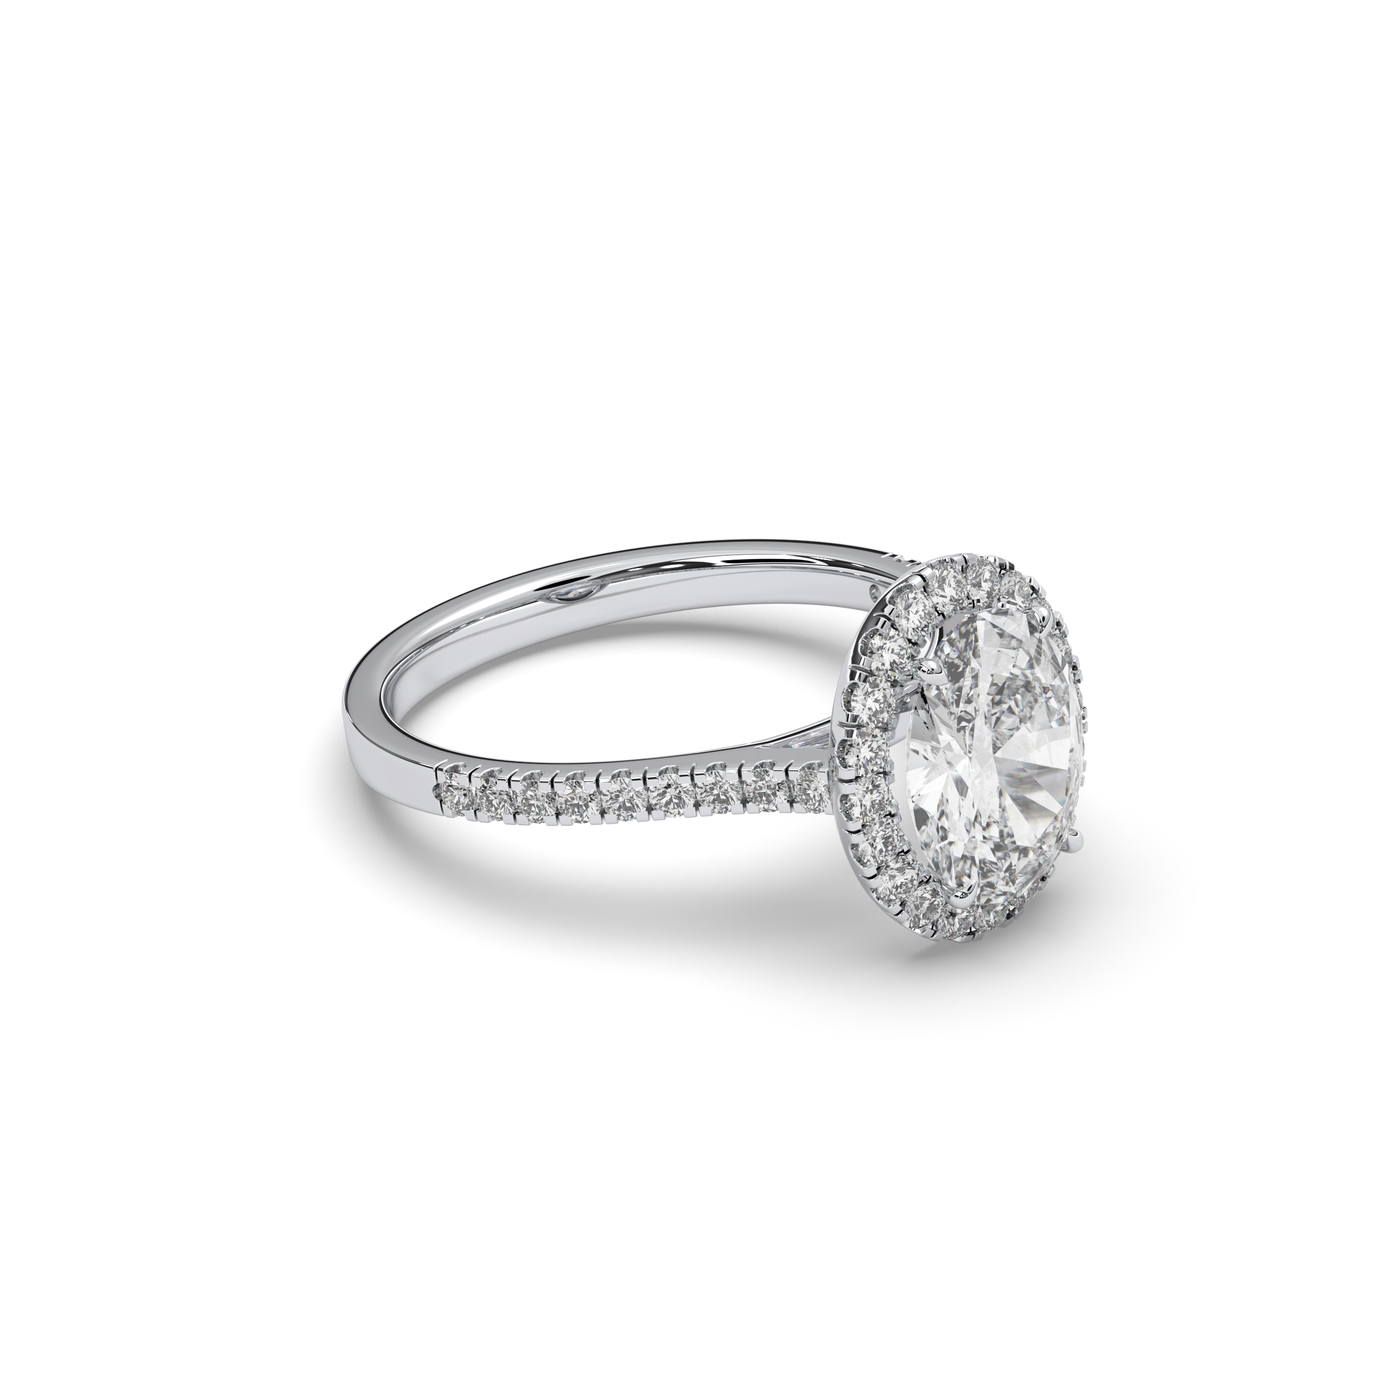 Copy of SB Classic Solitaire OVAL diamond Ring